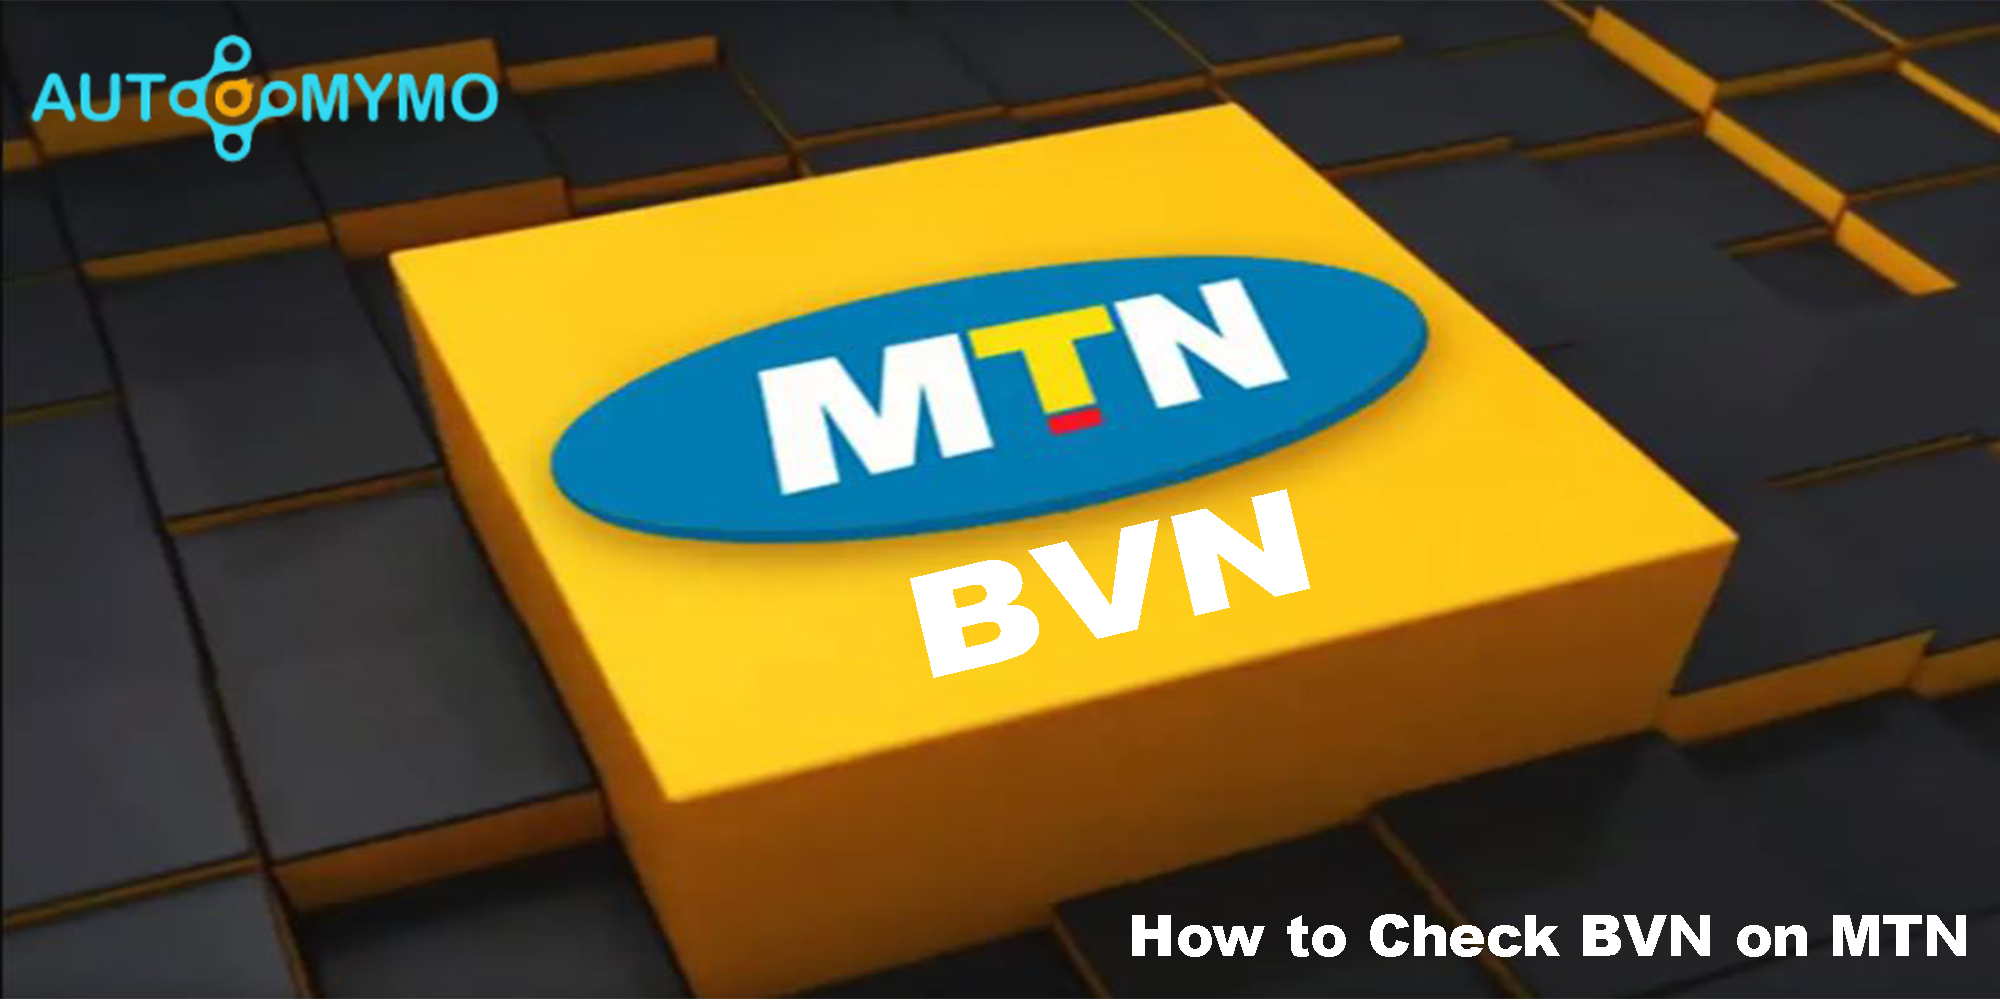 How to Check BVN on MTN